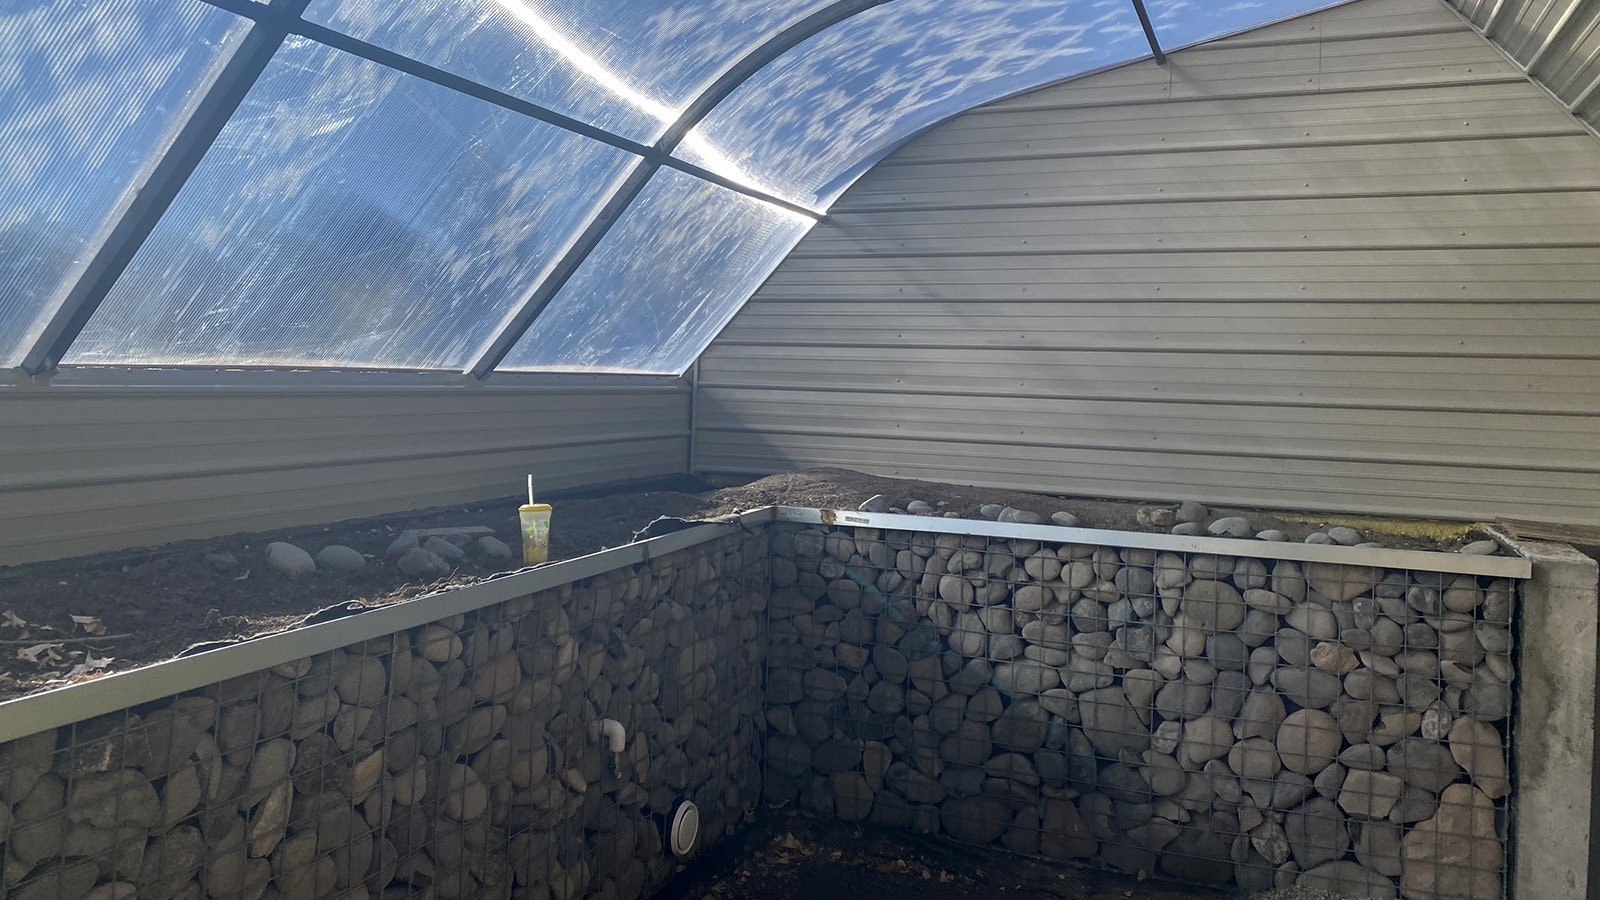 The geothermal greenhouse is built partly into the ground, with pipes delving 10-12 feet below the surface to tap into the earth's own natural thermostat to cool in summer and heat in winter.